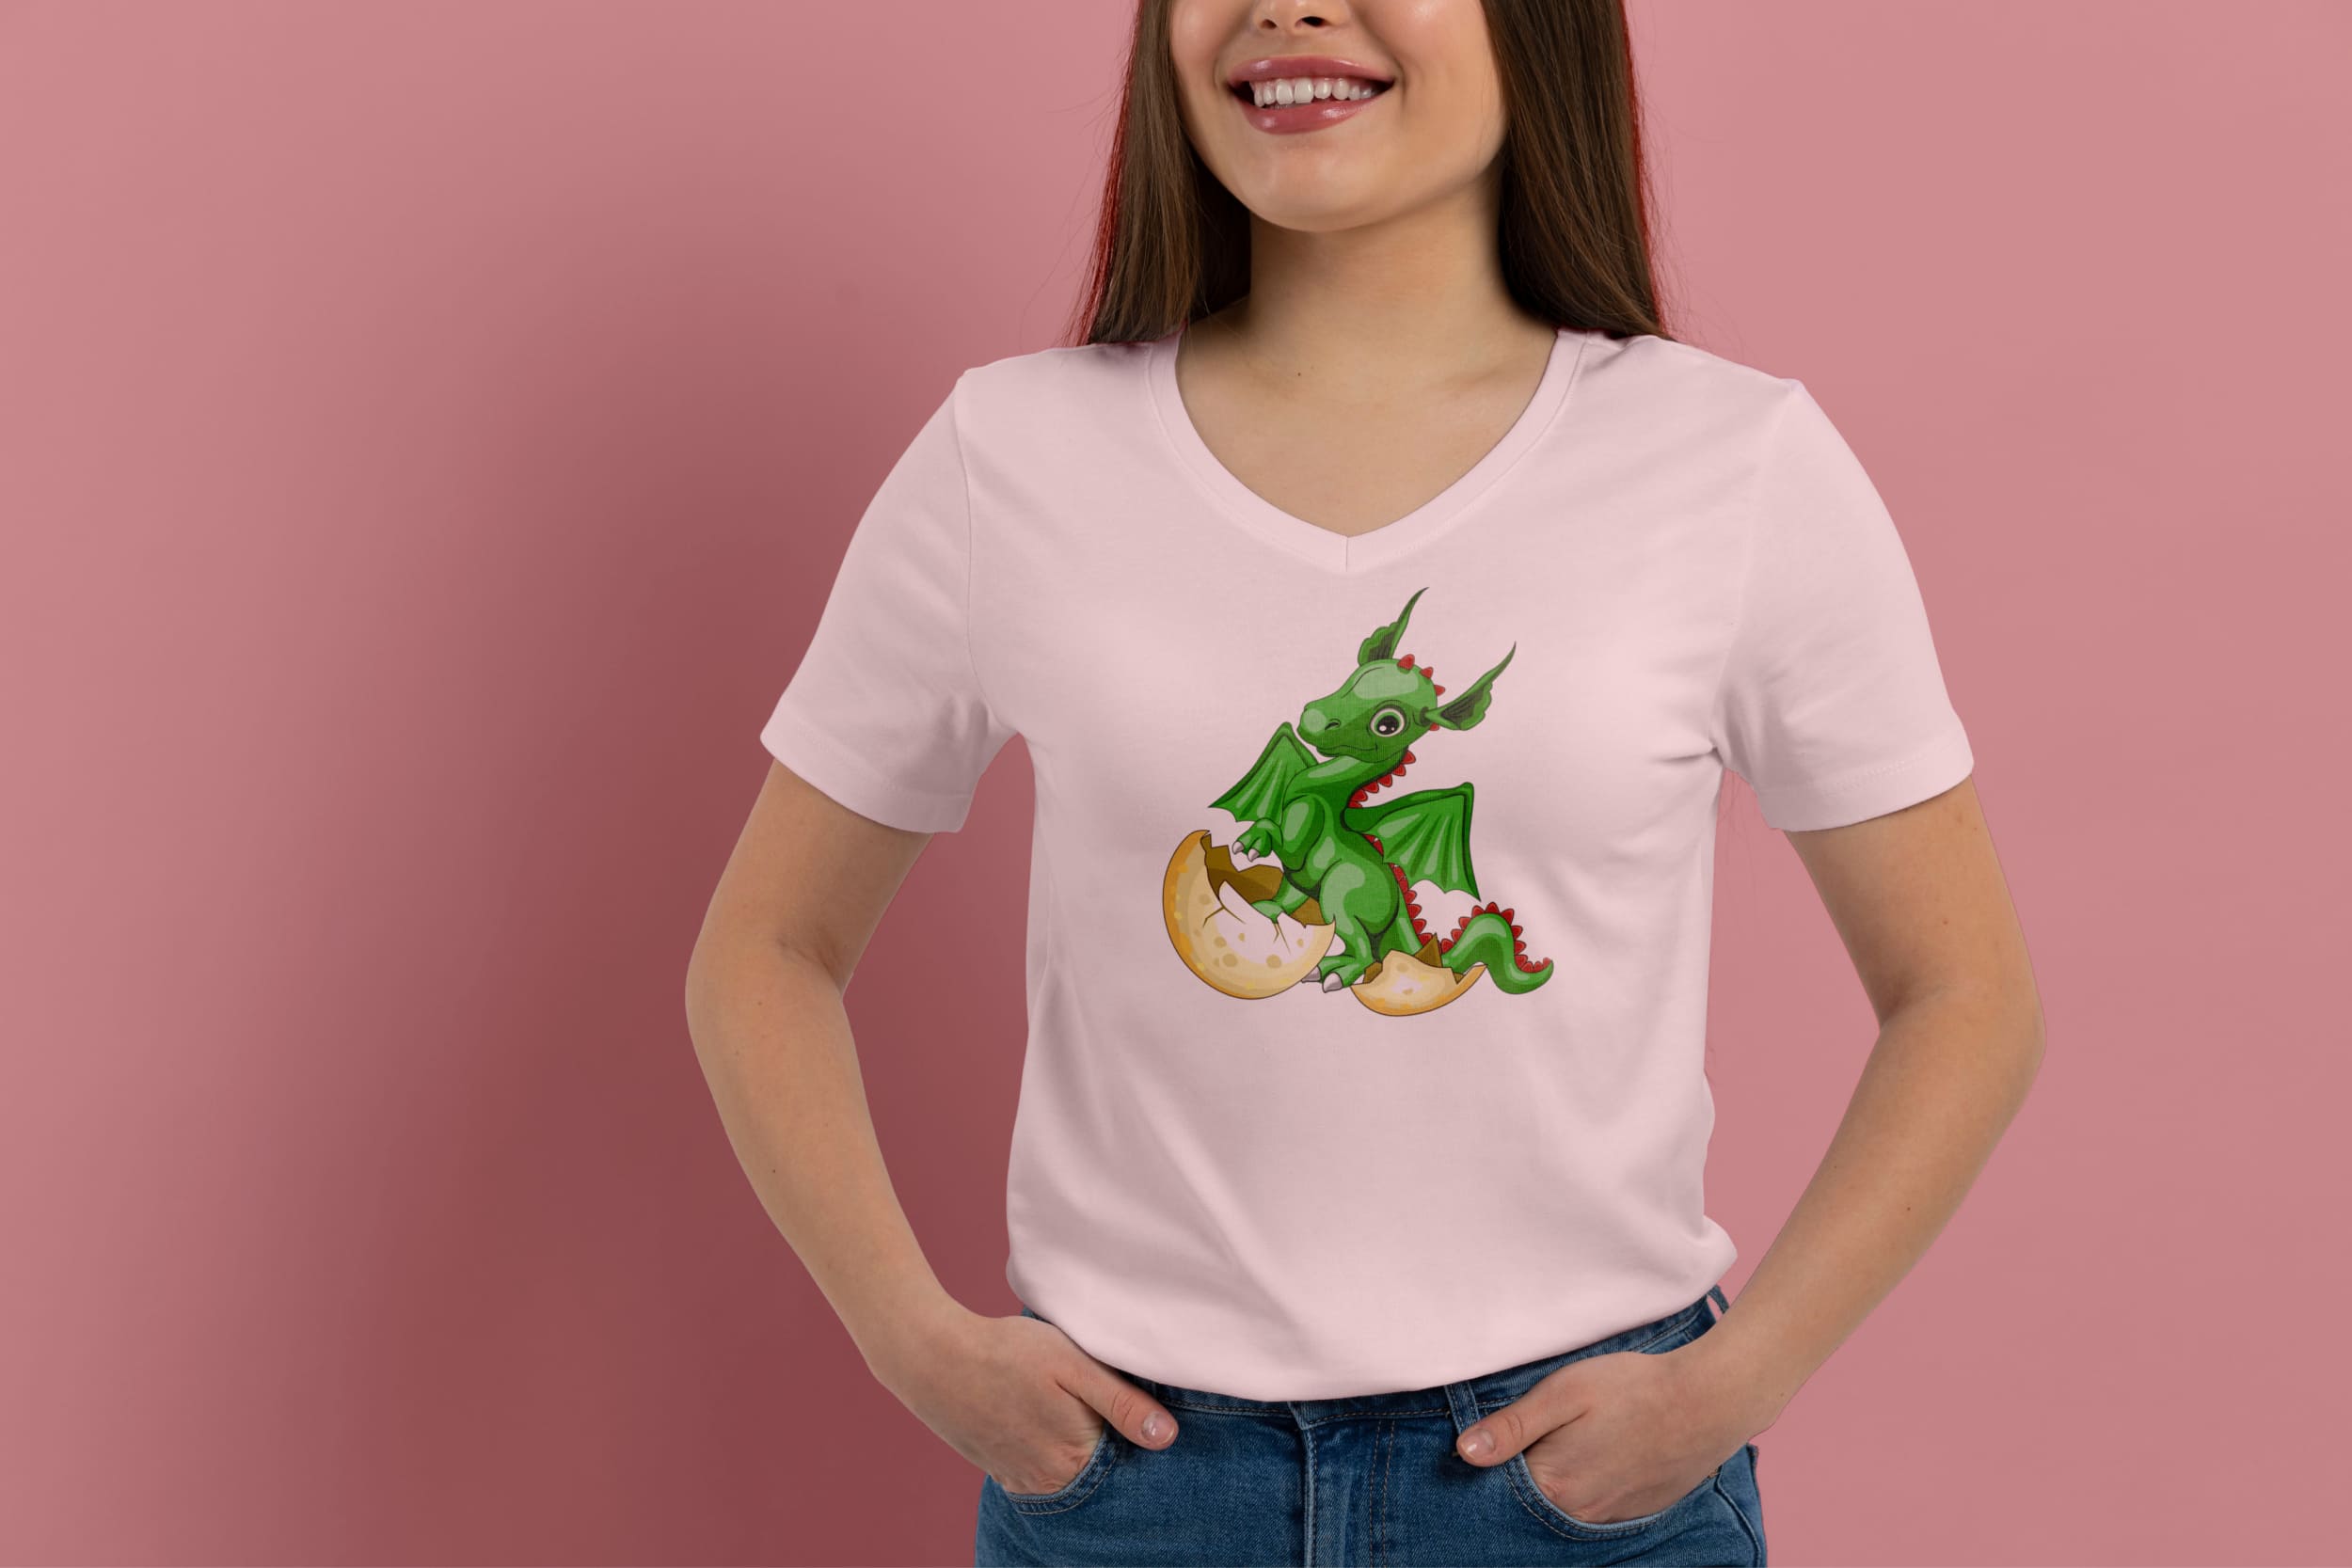 Light pink t-shirt on a girl with a green baby dragon hatched from an egg, on a pink background.